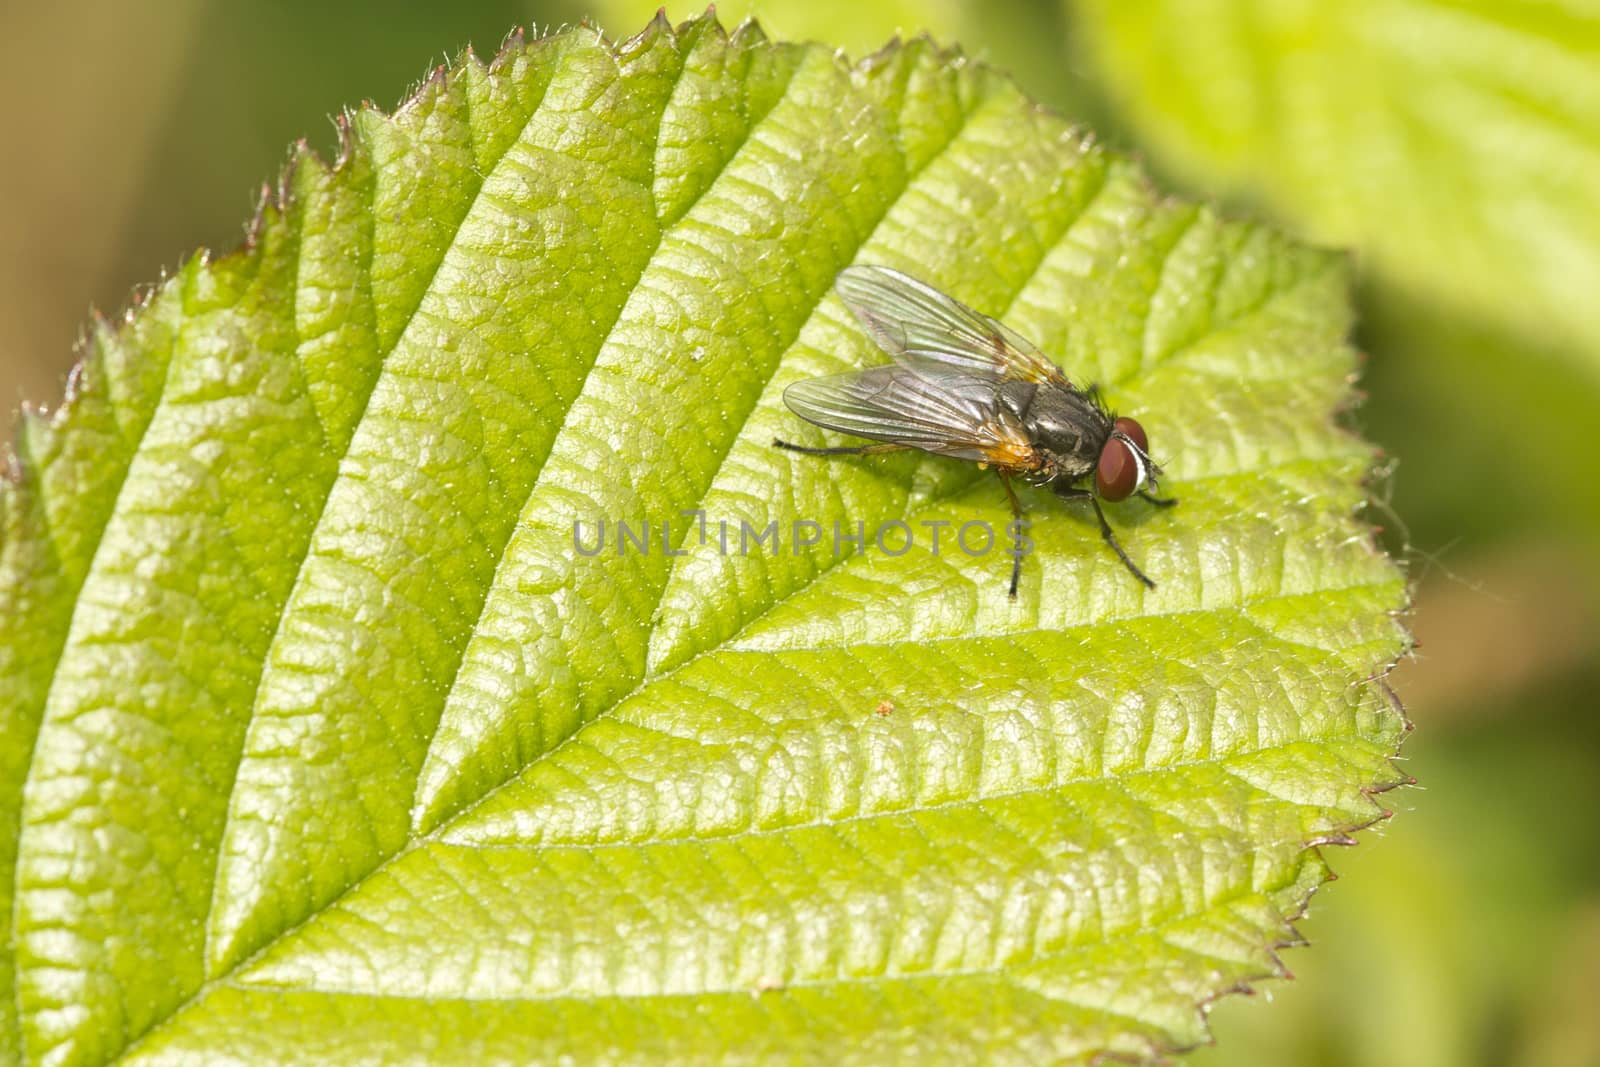 A Fly on a leaf close up